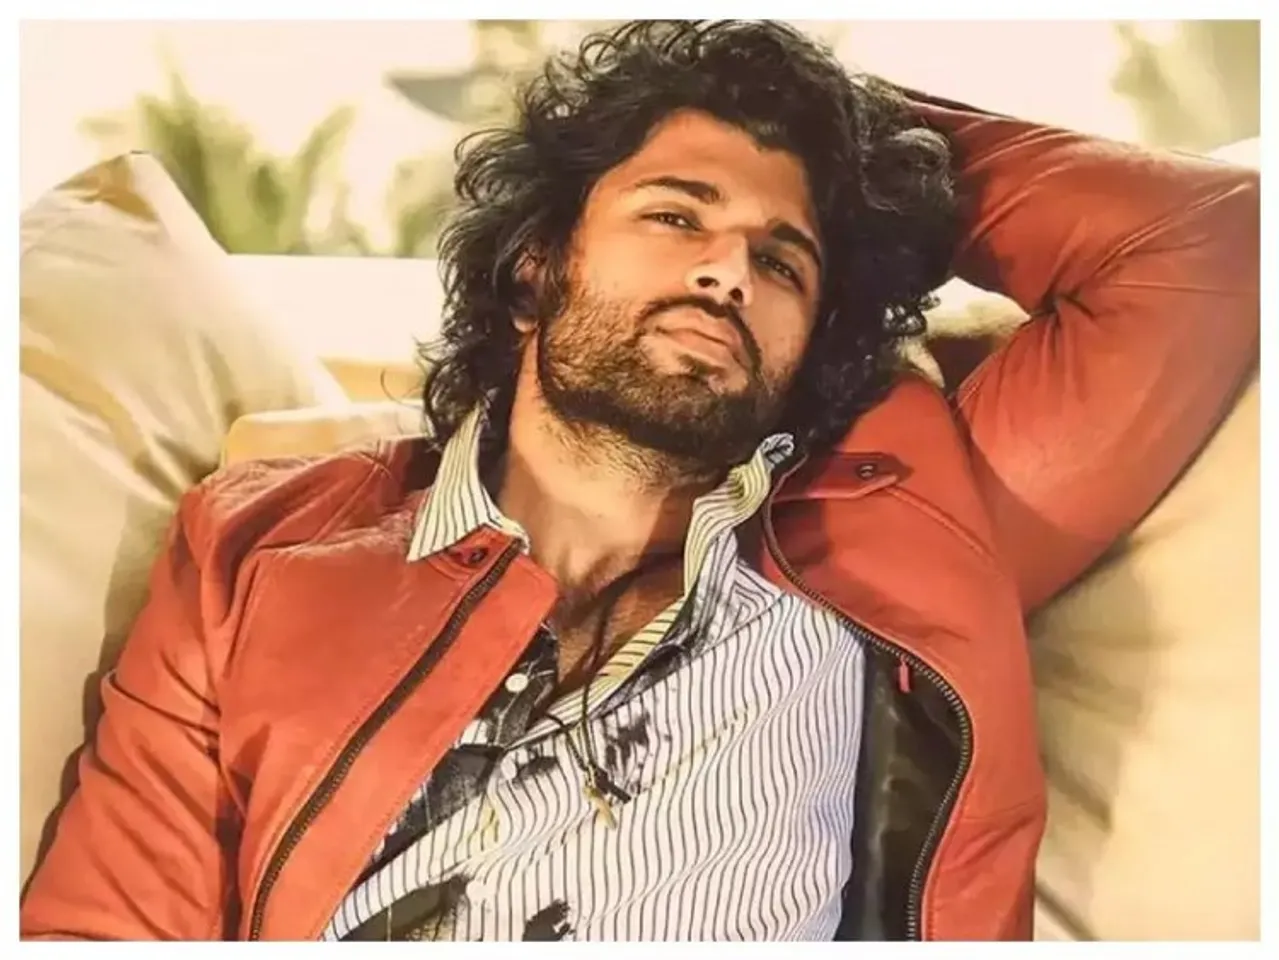 Will continue to act till it's exciting, says Vijay Deverakonda